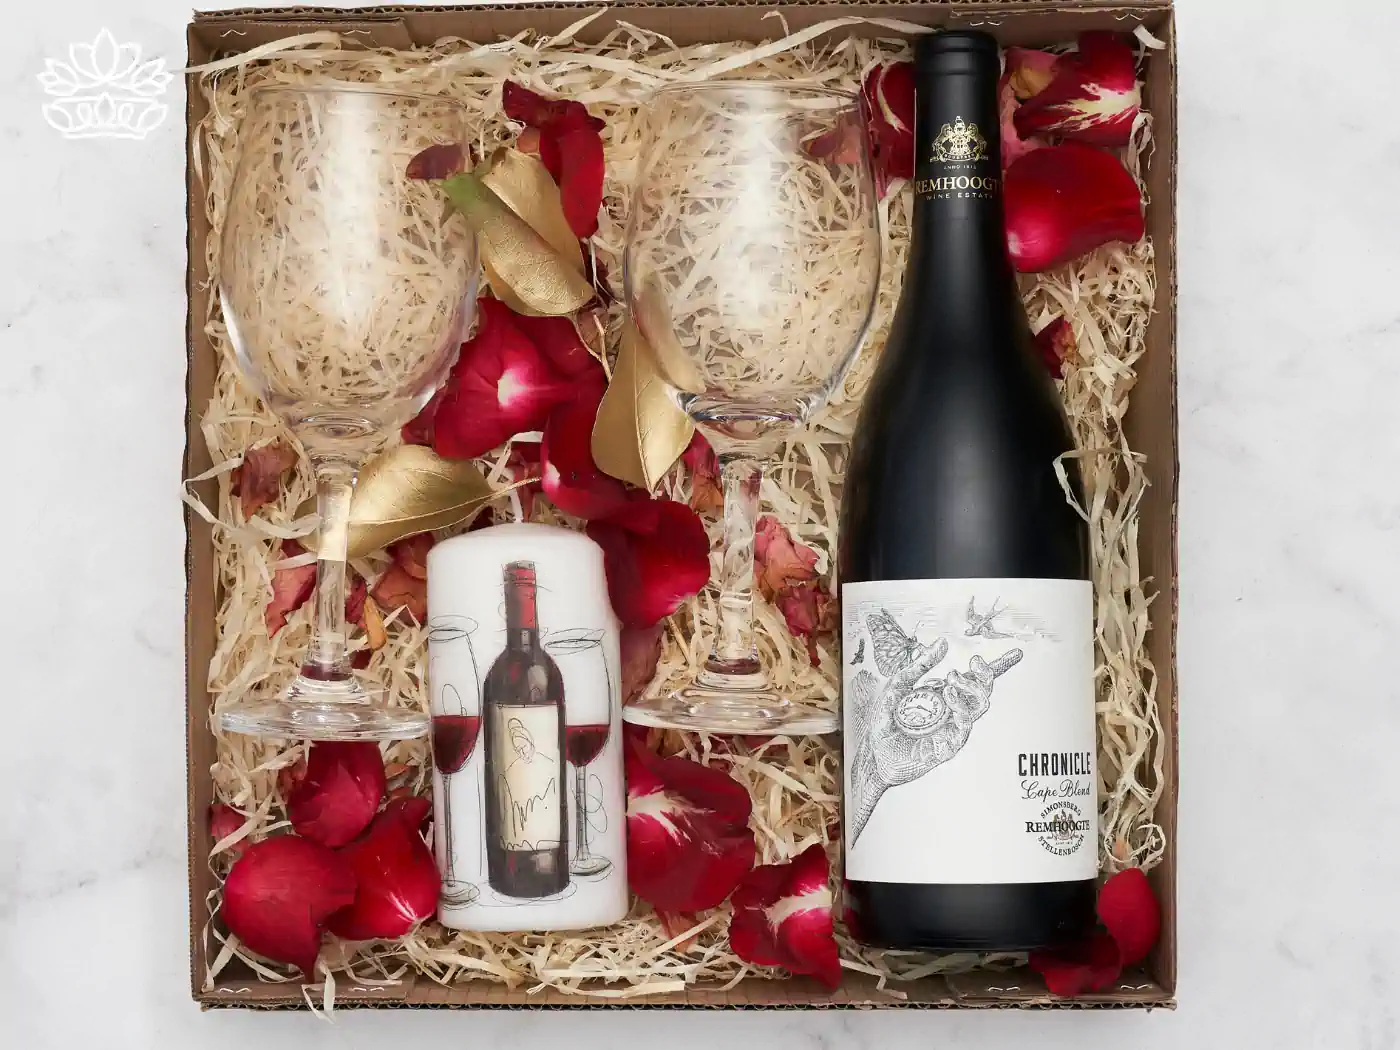 Elegant Secretary's Day gift box containing a bottle of fine wine, a decorative wine glass, and a candle, nestled among red rose petals and gold leaves, perfect for a sophisticated celebration. Fabulous Flowers and Gifts.